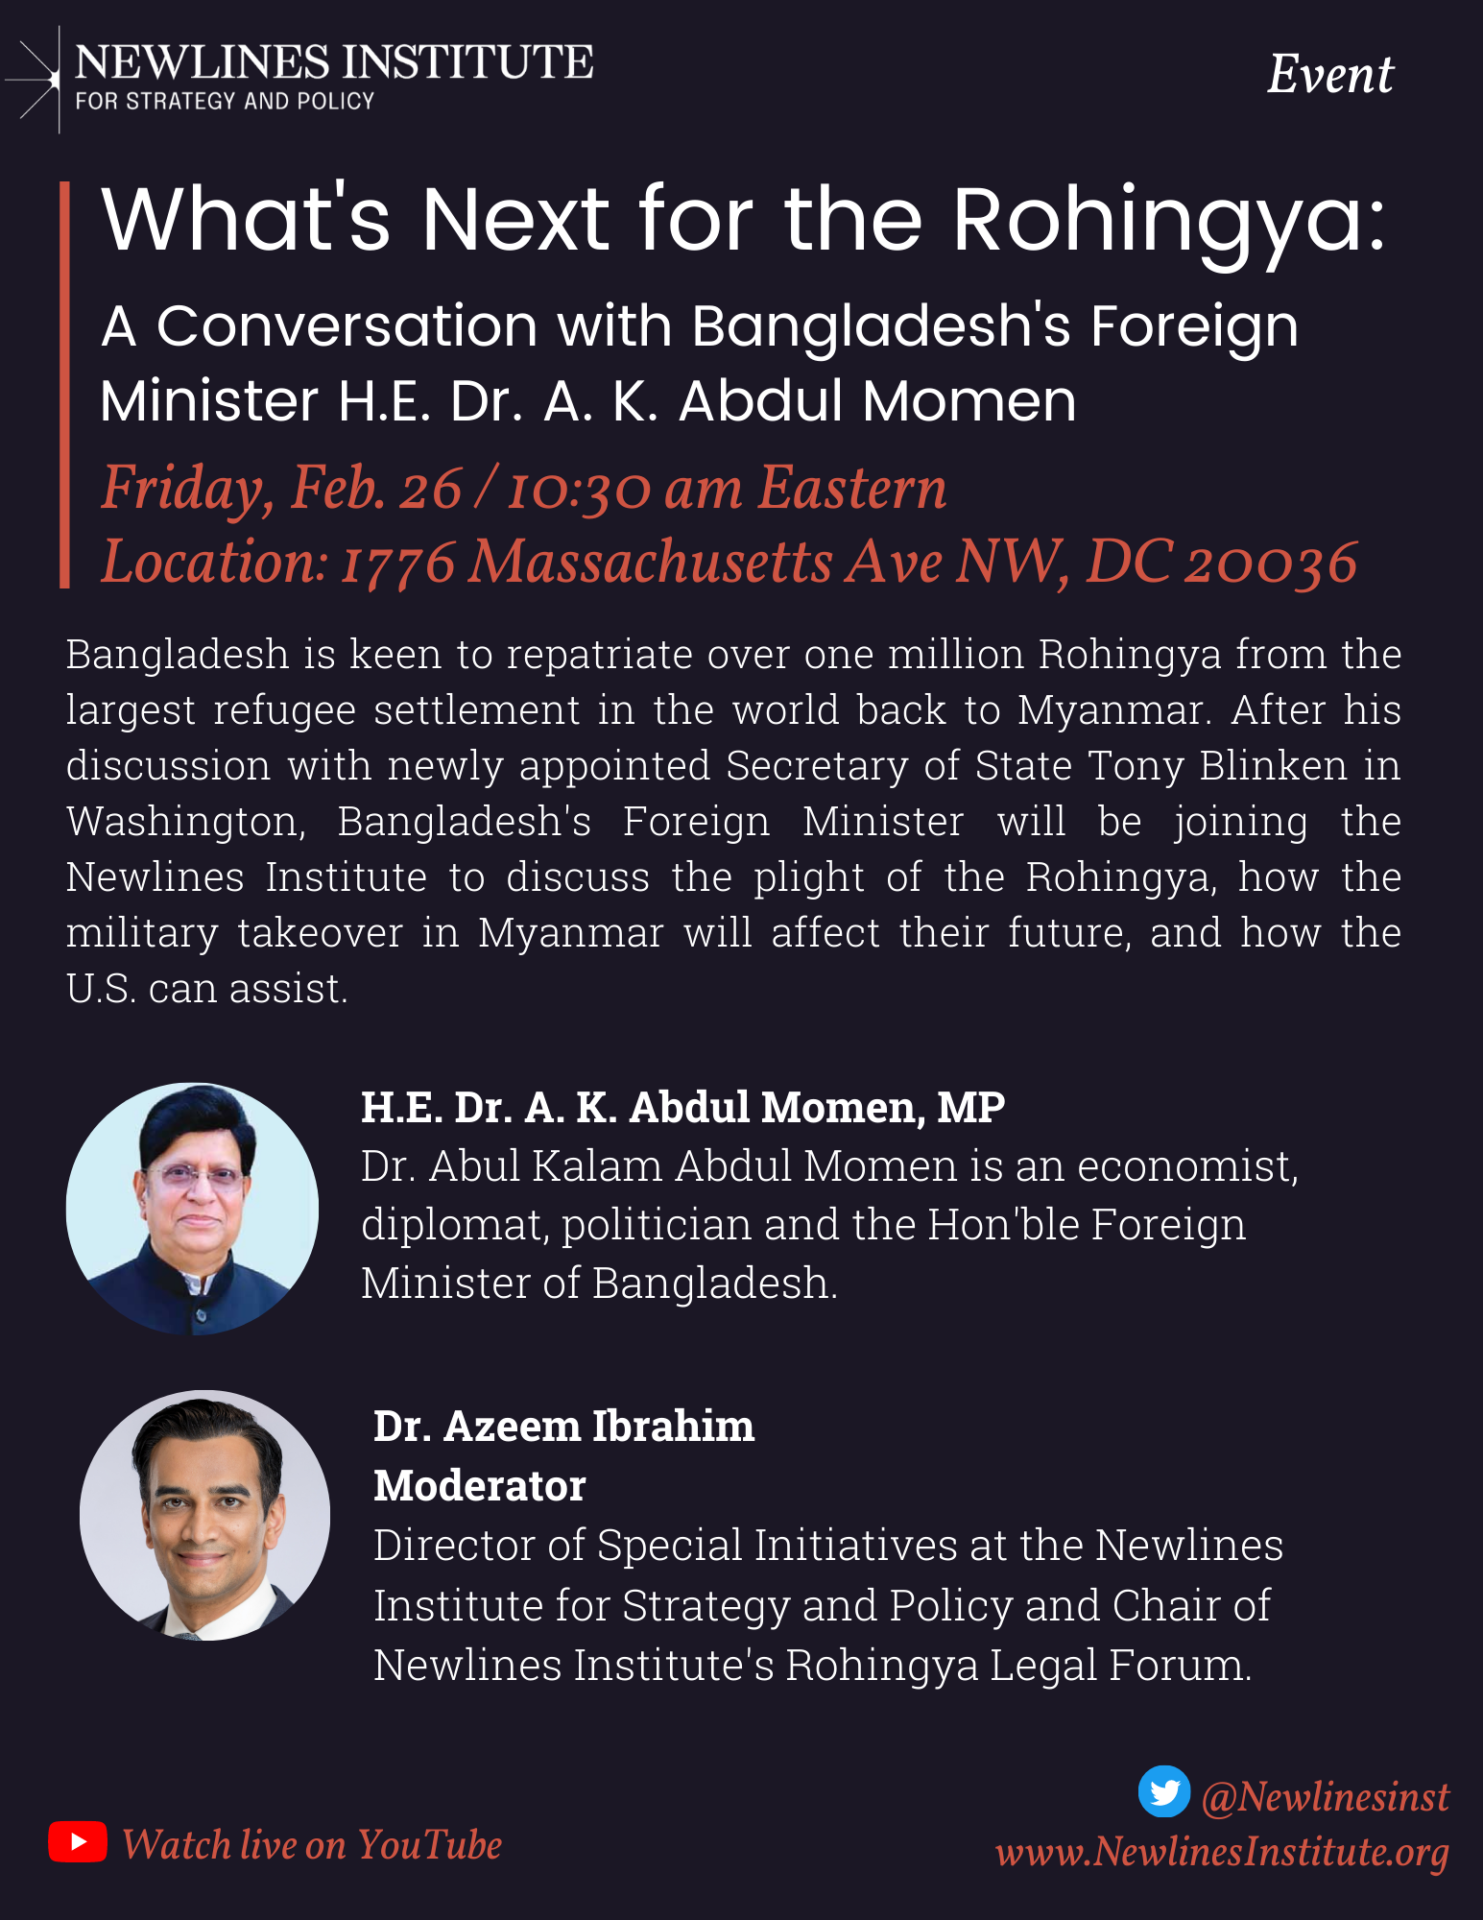 What’s Next for the Rohingya: A Conversation with Bangladesh’s Foreign Minister H.E. Dr. A. K. Abdul Momen